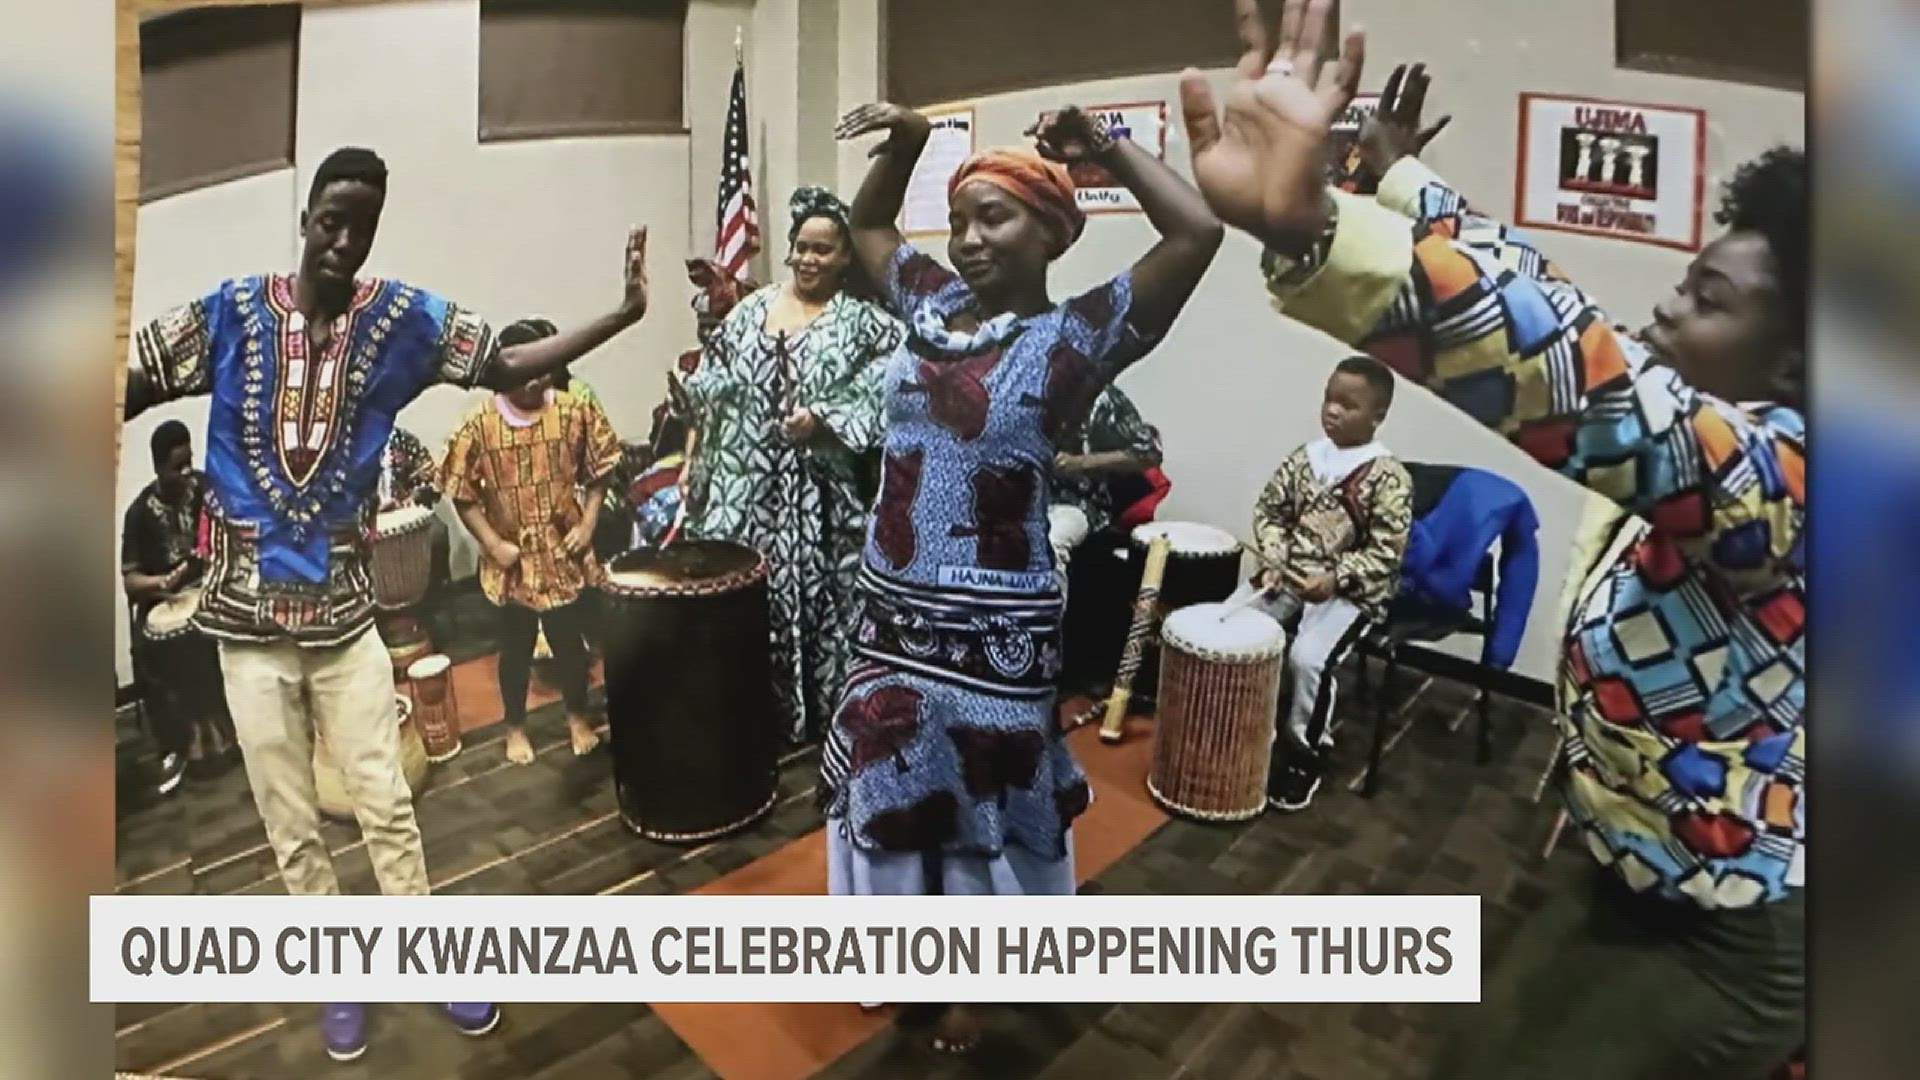 Dancing, a vendor fair, kids crafts, poetry and more will be on display at this year's QC Kwanzaa. It's an evening of free performances and celebrating creativity.